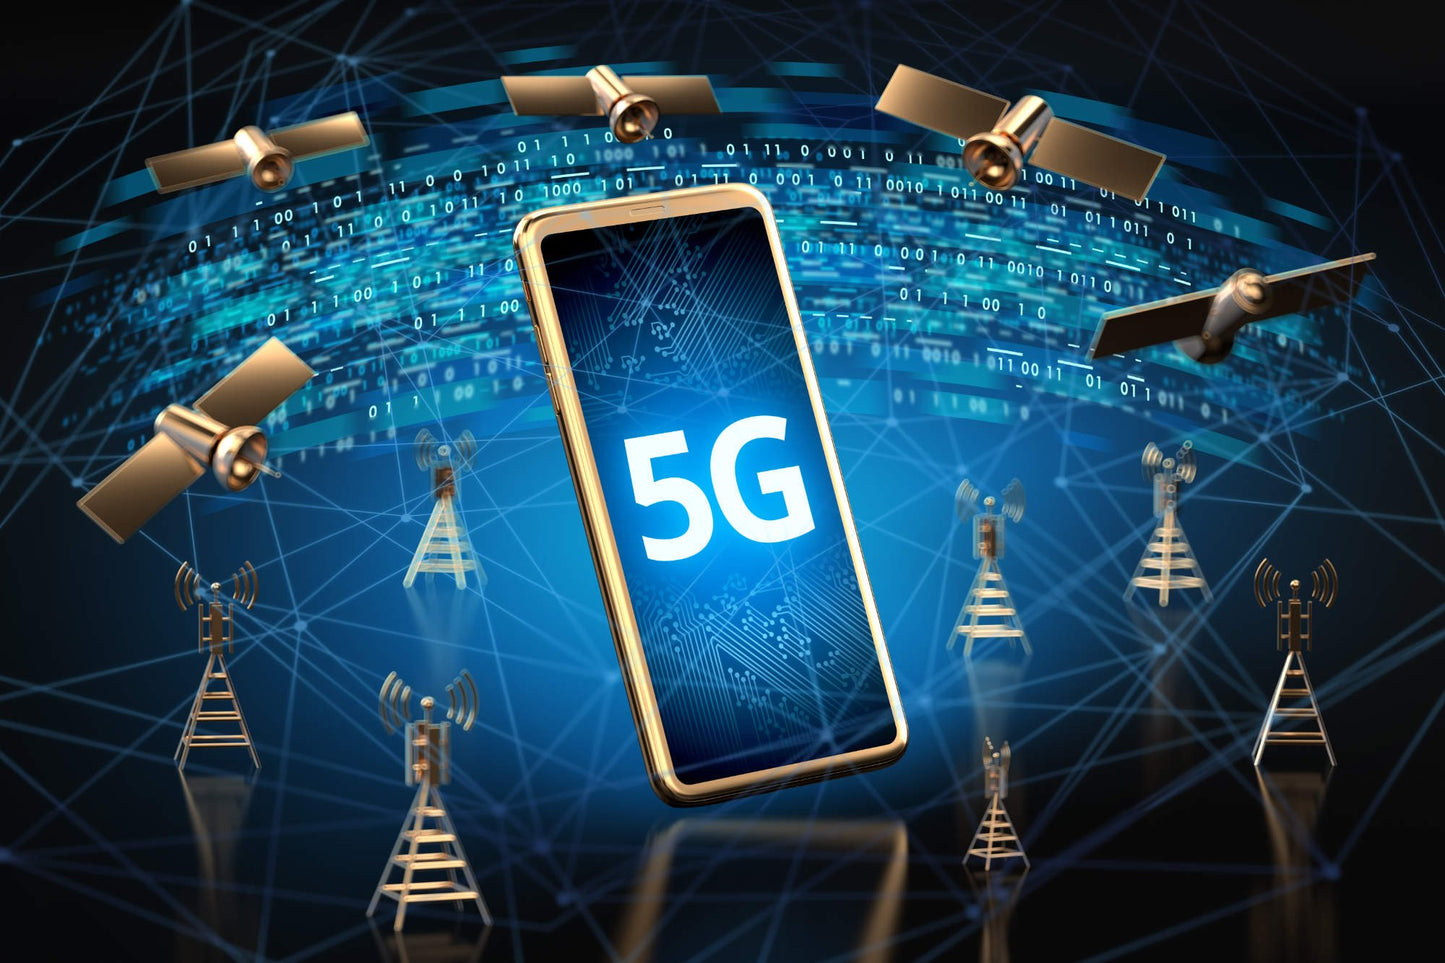 Graphic with a 5G cell phone in the center, surrounded by cell towers and satellites, with 0 and 1 numbers in the background symbolizing information being transmitted|Artistic depiction of a house surrounded by 5G towers